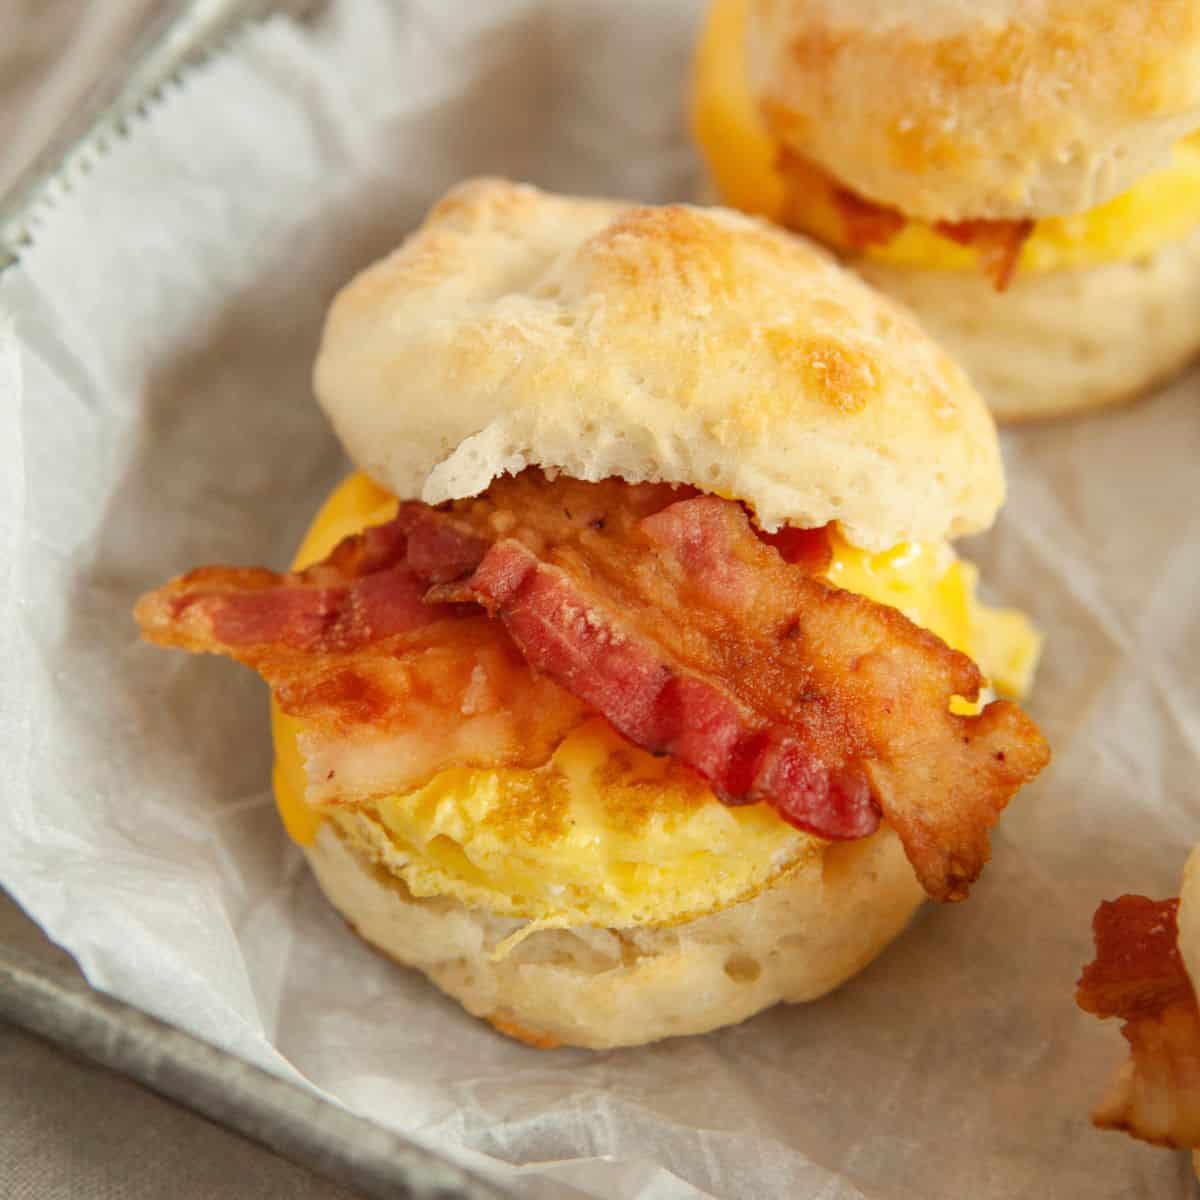 Bacon, Egg, and Cheese Biscuit Recipe (Make-Ahead)